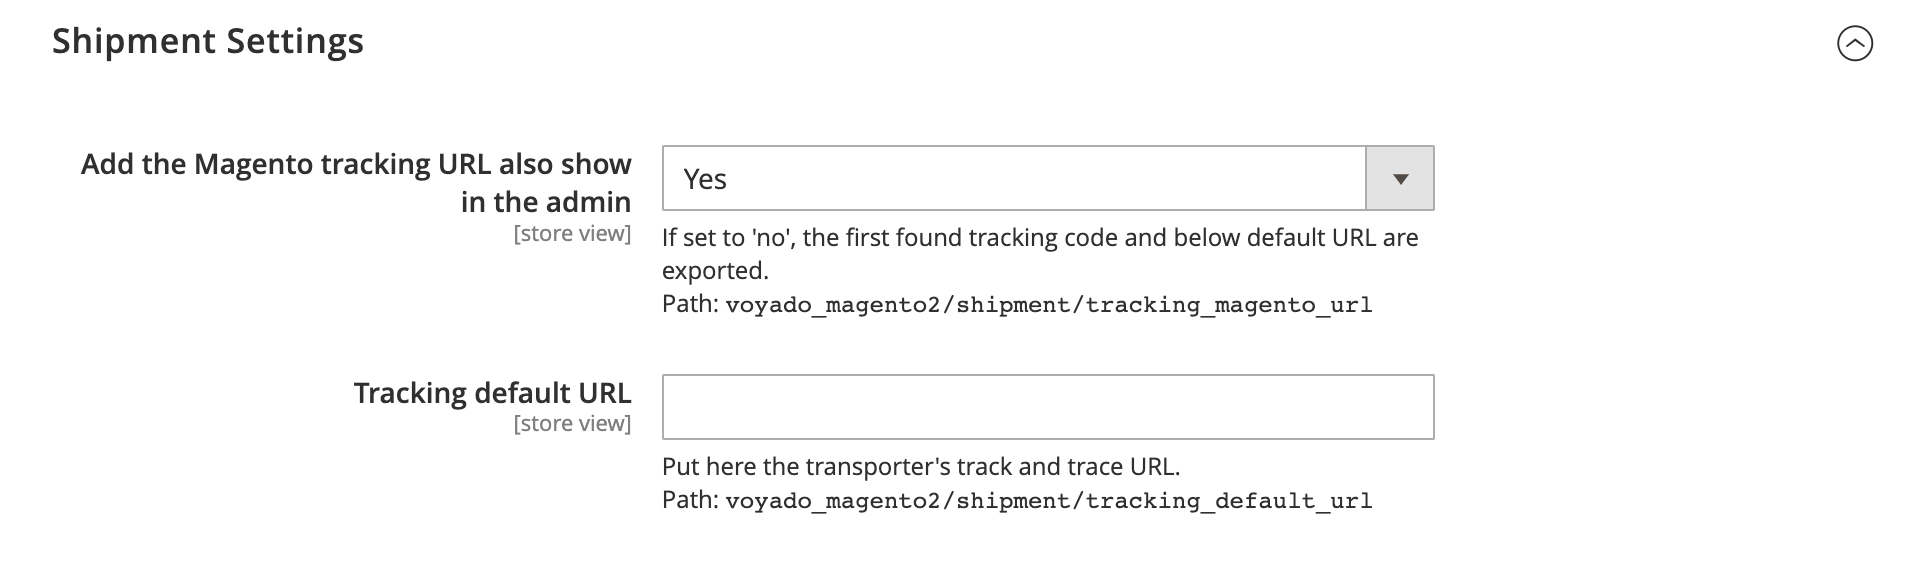 magento-shipment-settings-yes.png